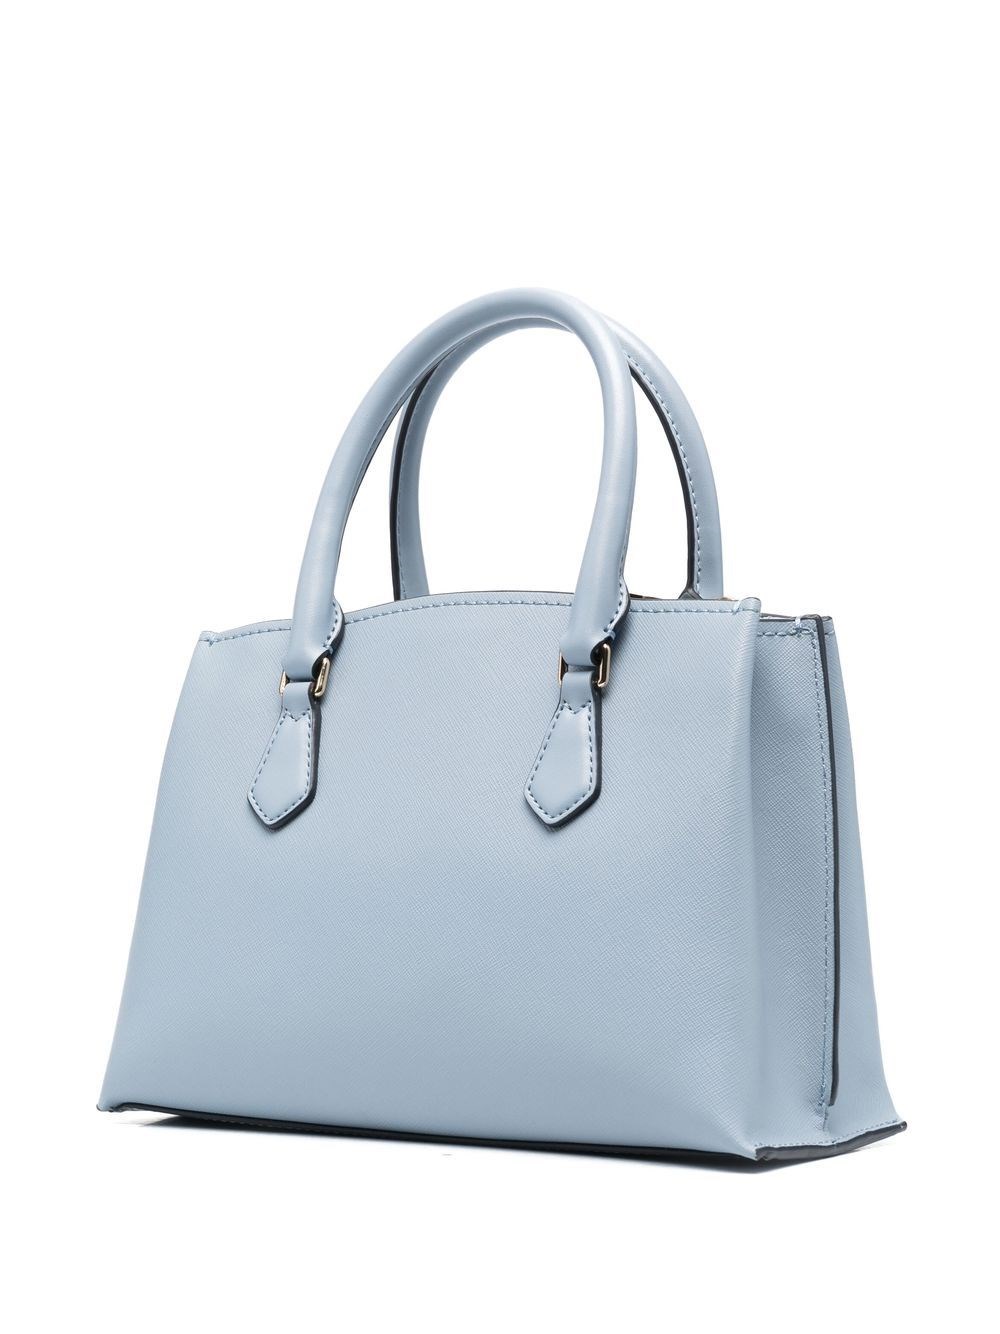 michael kors mk 487 PALE BLUE available on - 53246